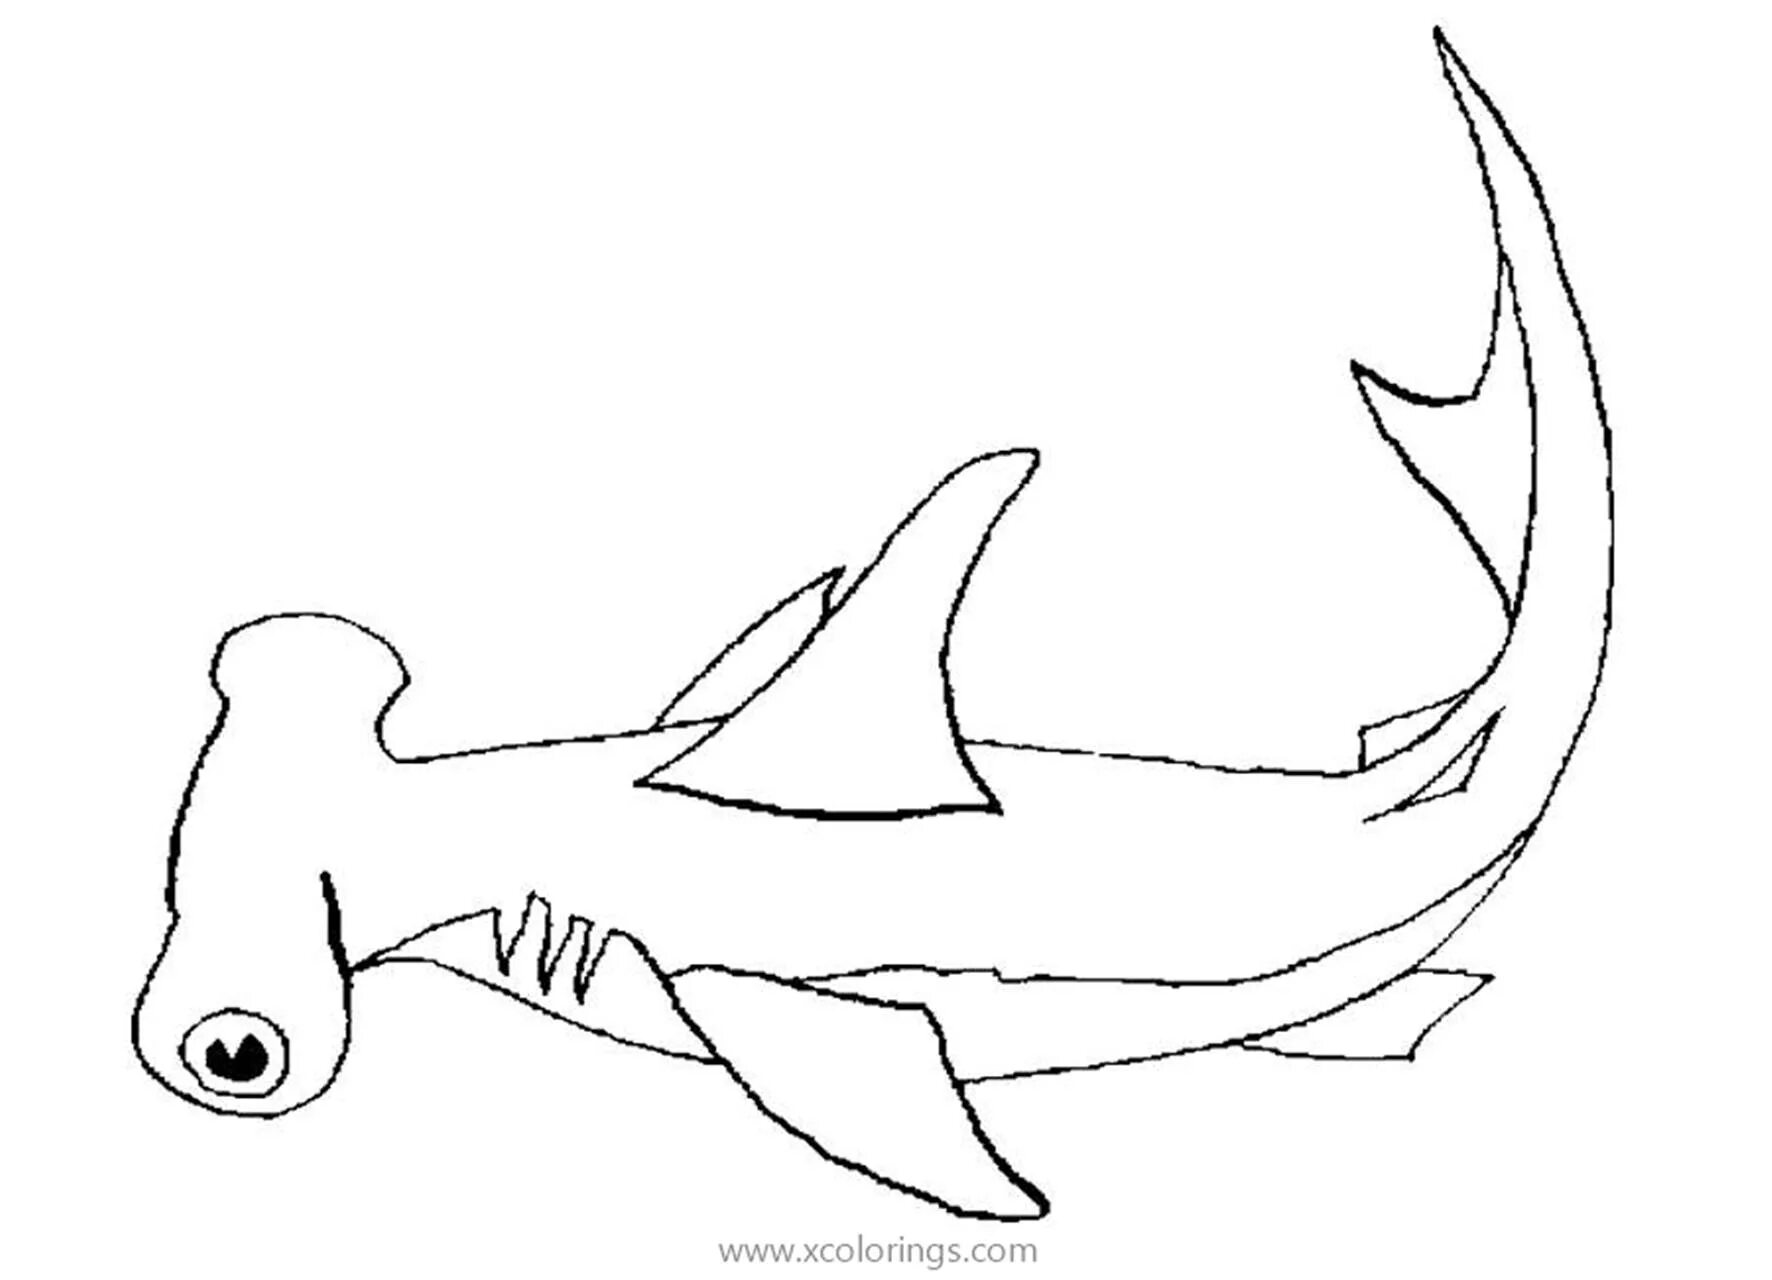 Shiny hammerhead coloring page